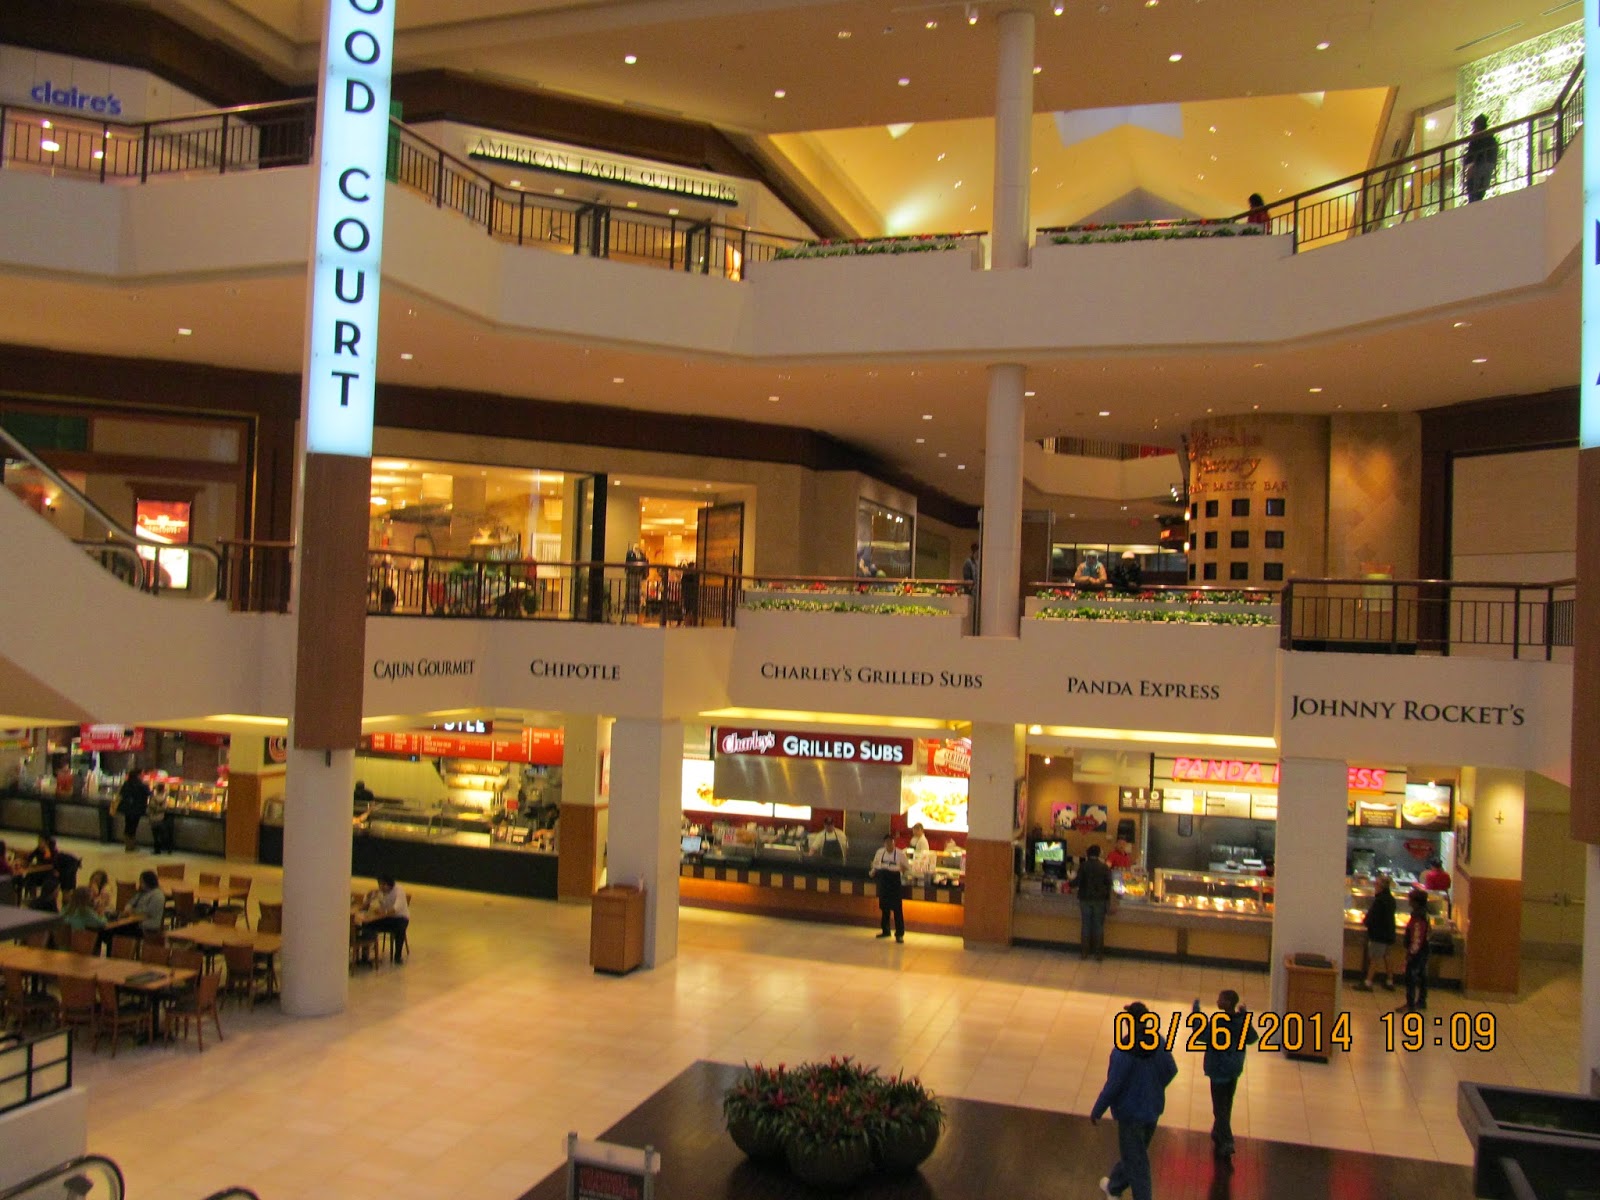 Trip to the Mall: St. Louis Galleria- (Richmond Heights, MO)